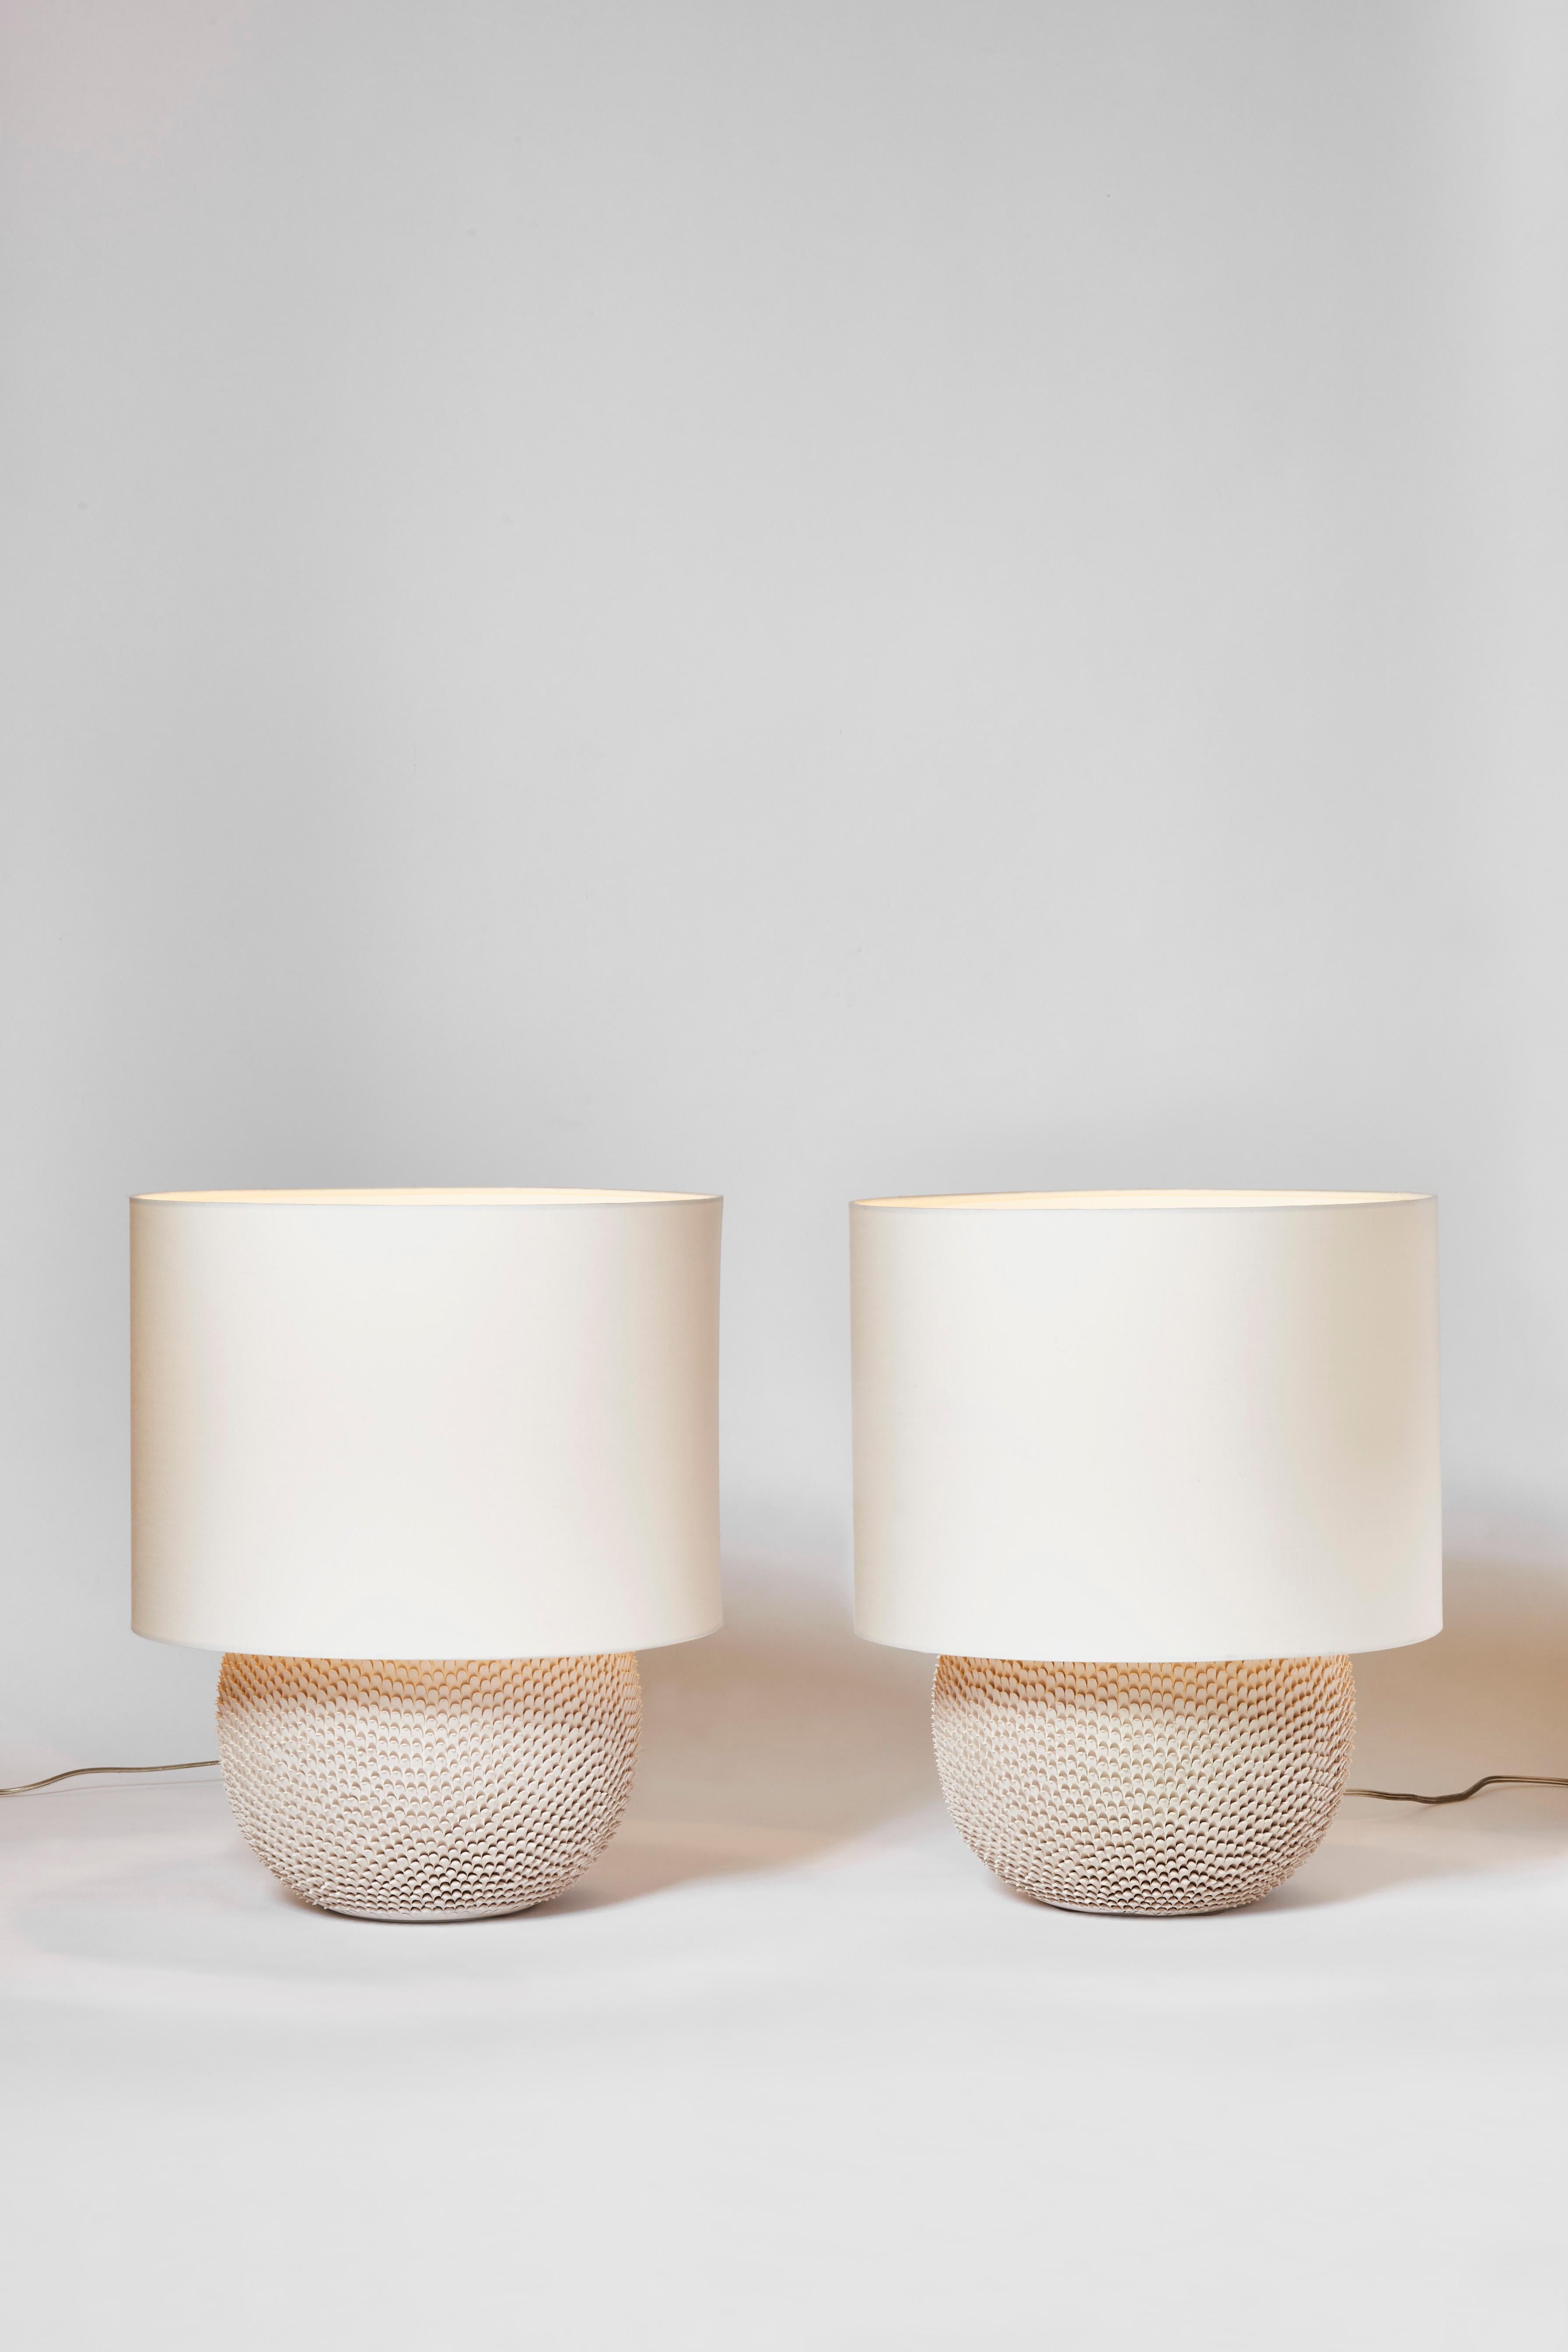 Pair of beautiful French modern table lamps made of natural color ceramic.
The whole surface of the lamps are hand-pinched to create this impression of scales or feathers.